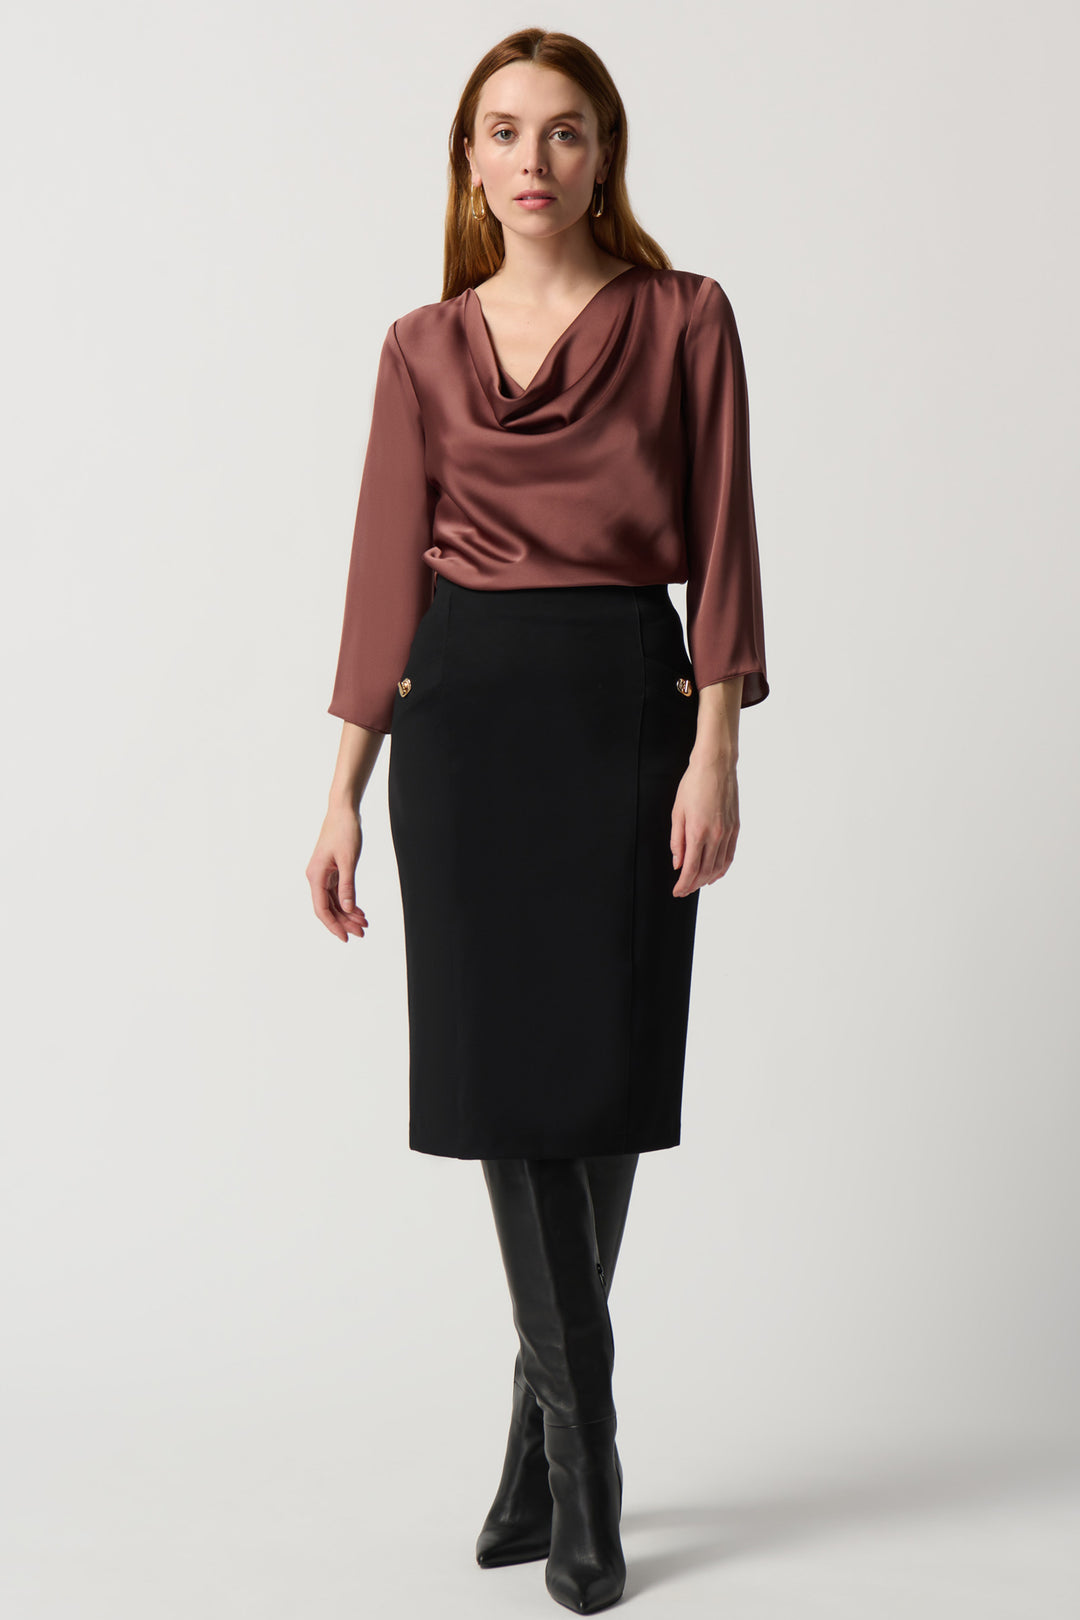 Featuring a concealed elastic waistband, two front pockets with ornamental turn-locks, knit fabric and length below the knees, you’ll look professional and feel secure. 